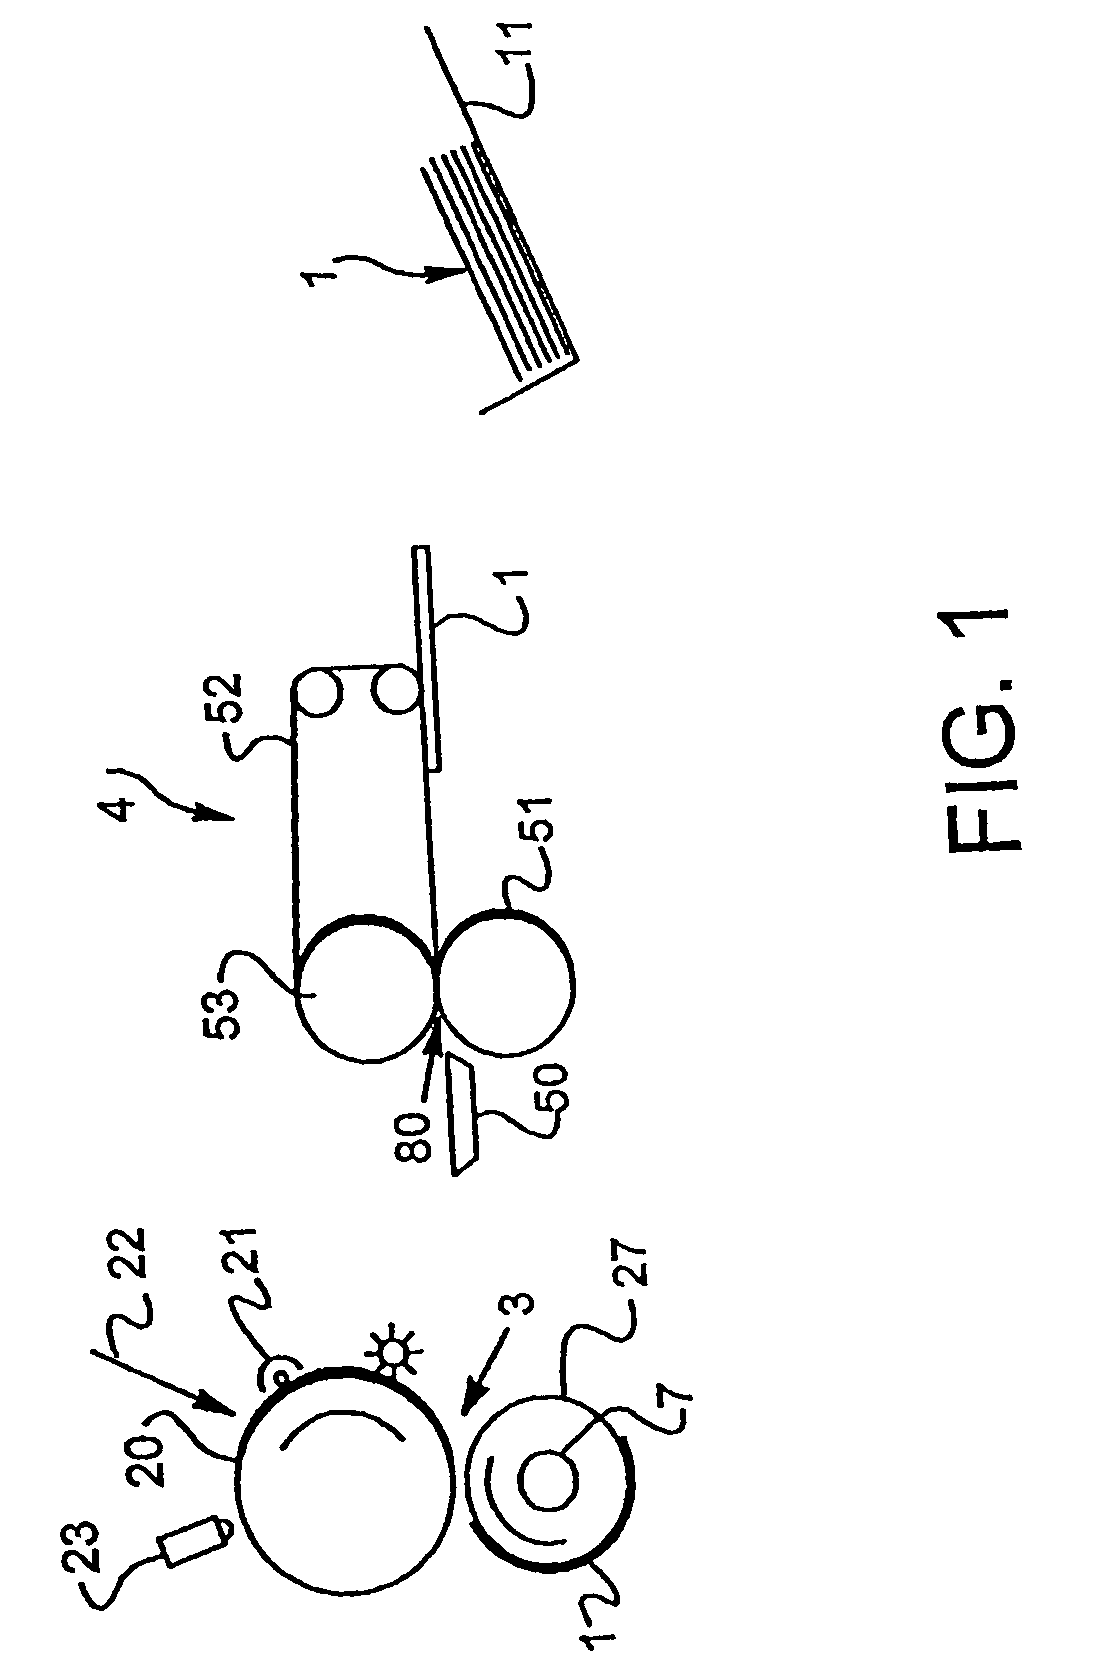 Fuser member, apparatus and method for electrostatographic reproduction